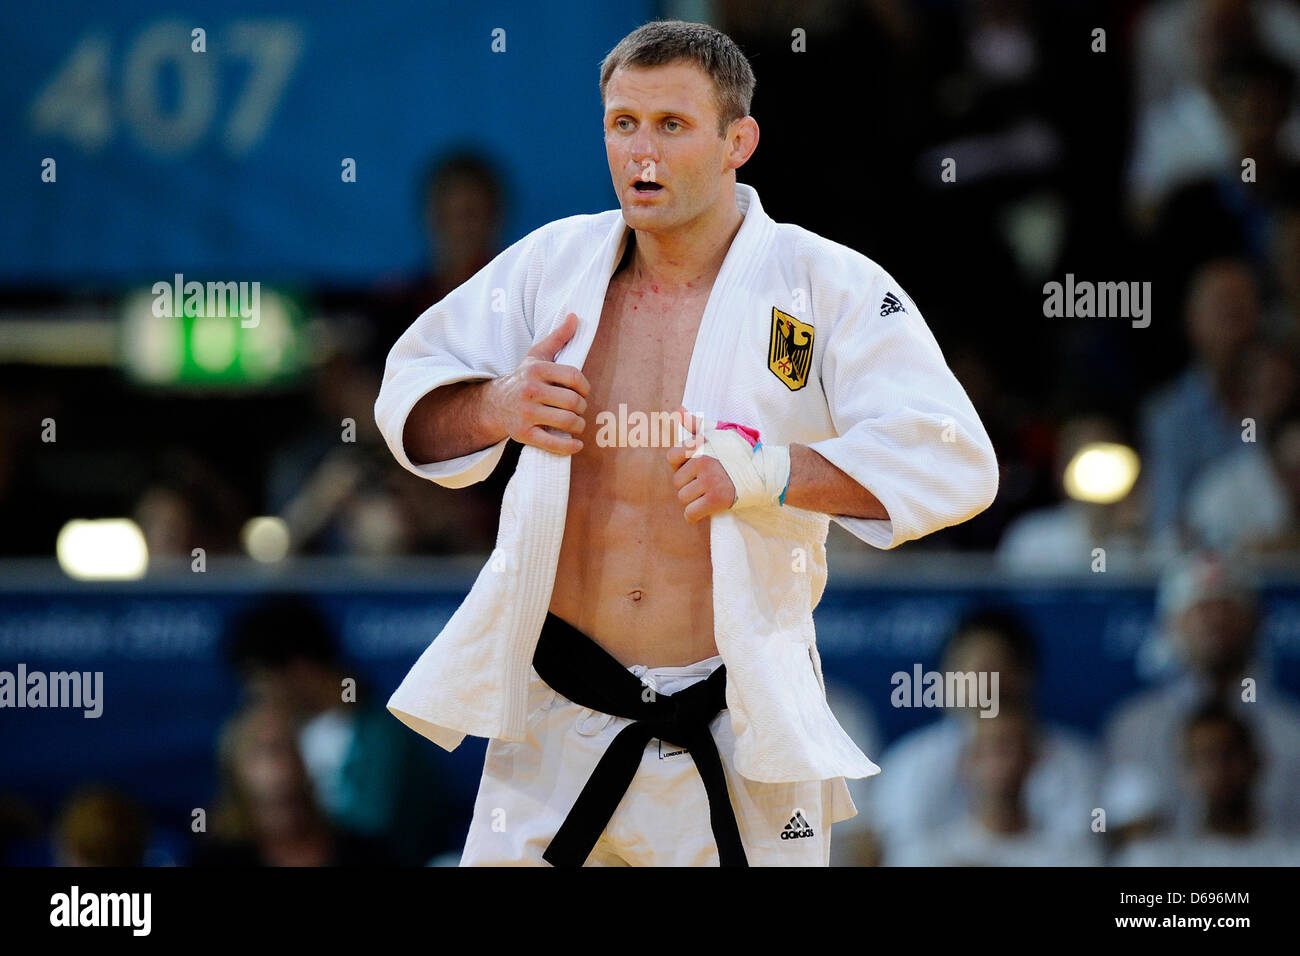 Germany's judoka Ole Bischof reacts after the final match of the Men's -81kg judo event against Jae-Bum of South Korea in the ExCeL Arena at the London 2012 Olympic Games, London, Great Britain, 31 July 2012. Photo: Marius Becker dpa  +++(c) dpa - Bildfunk+++ Stock Photo